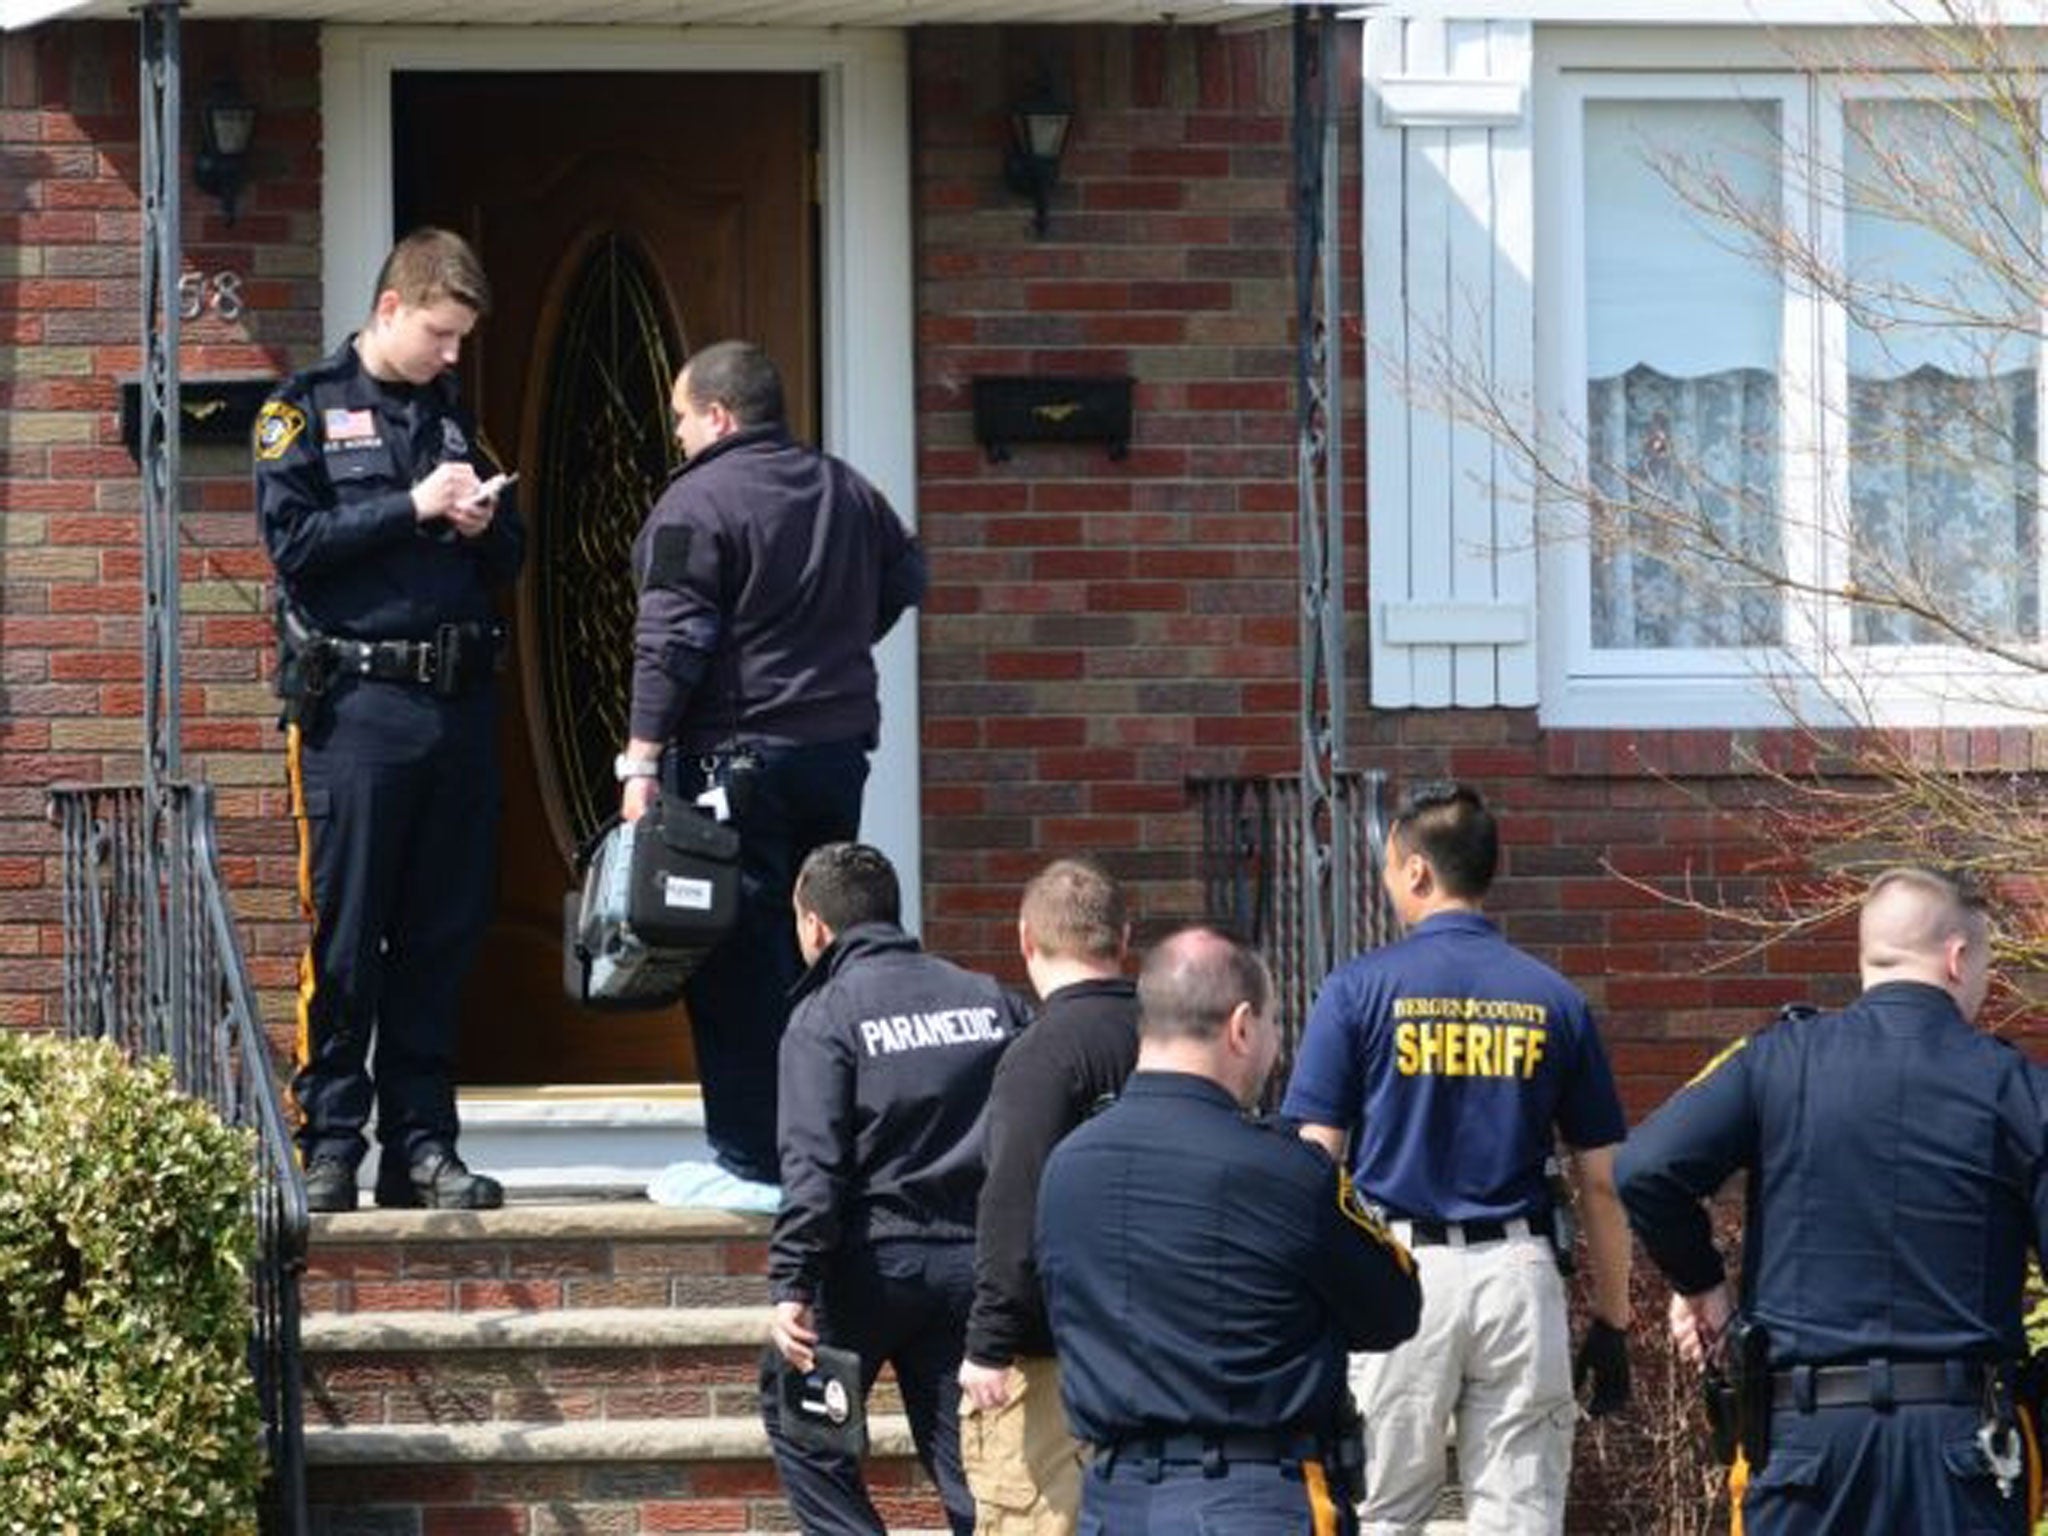 Authorities arrive at a home where the bodies of an elderly couple were found Monday, April 6, 2015, in Elmwood Park, N.J. Prosecutors say a 100-year-old man apparently killed his wife with an ax as she slept in their home, then killed himself in the bath